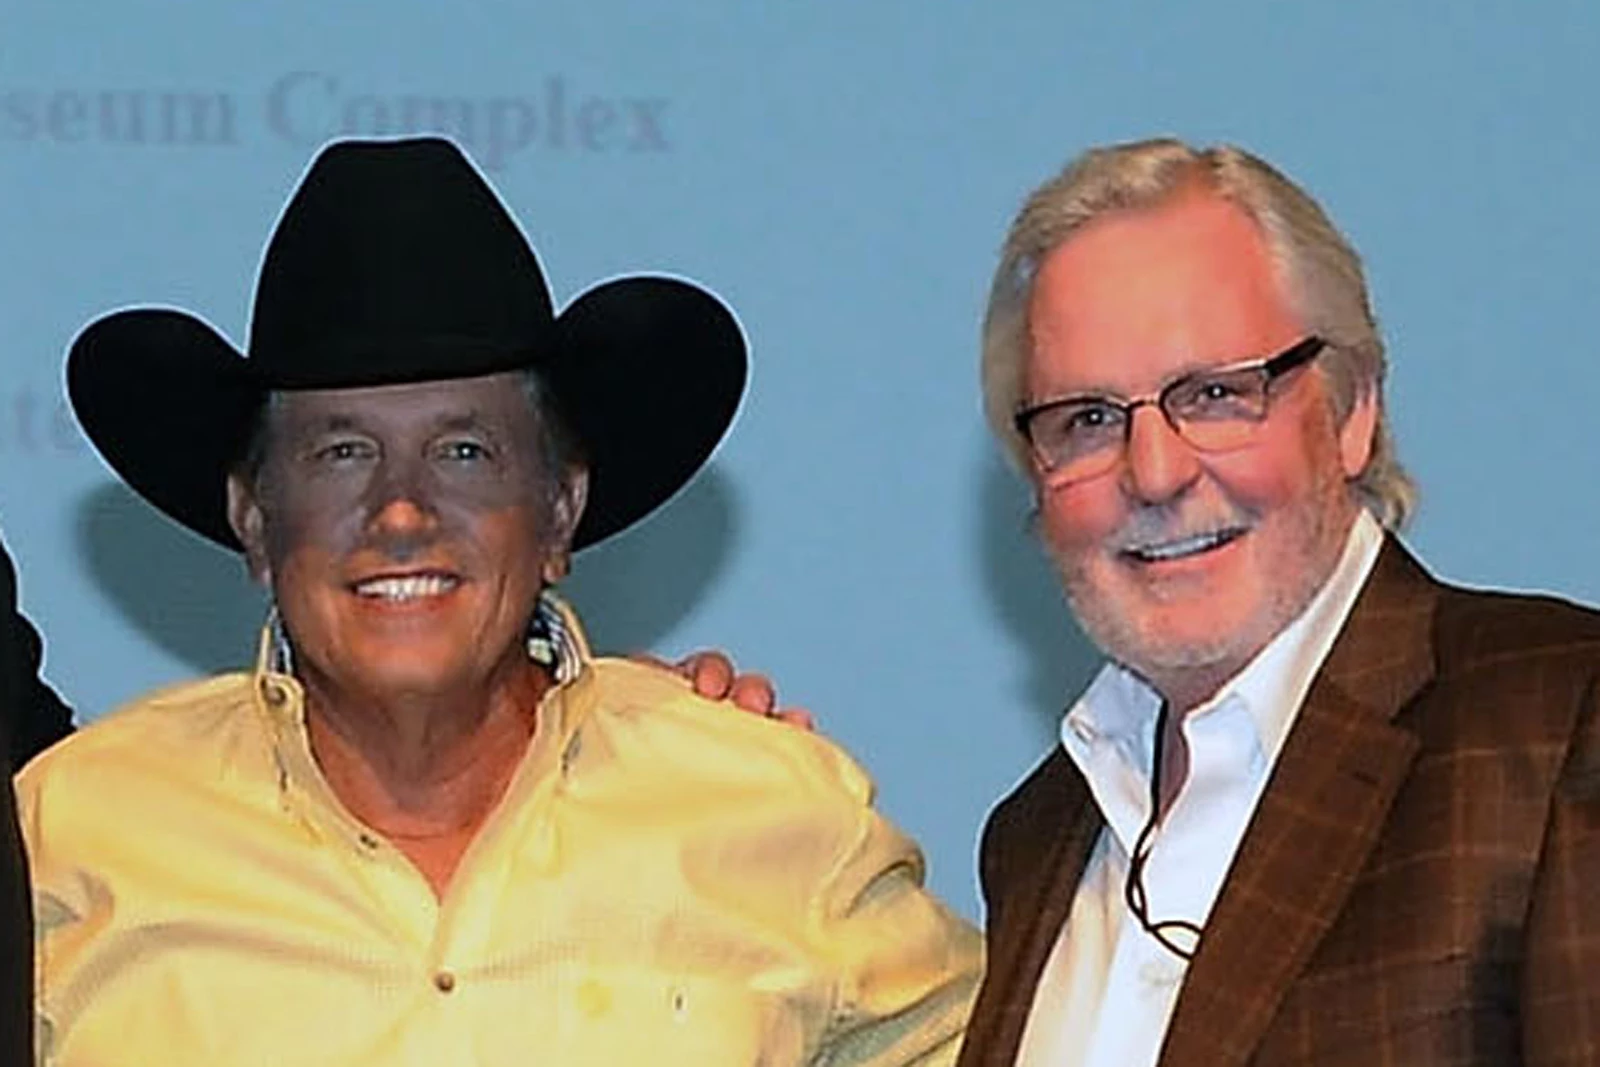 George Strait's Manager Erv Woolsey Has Died